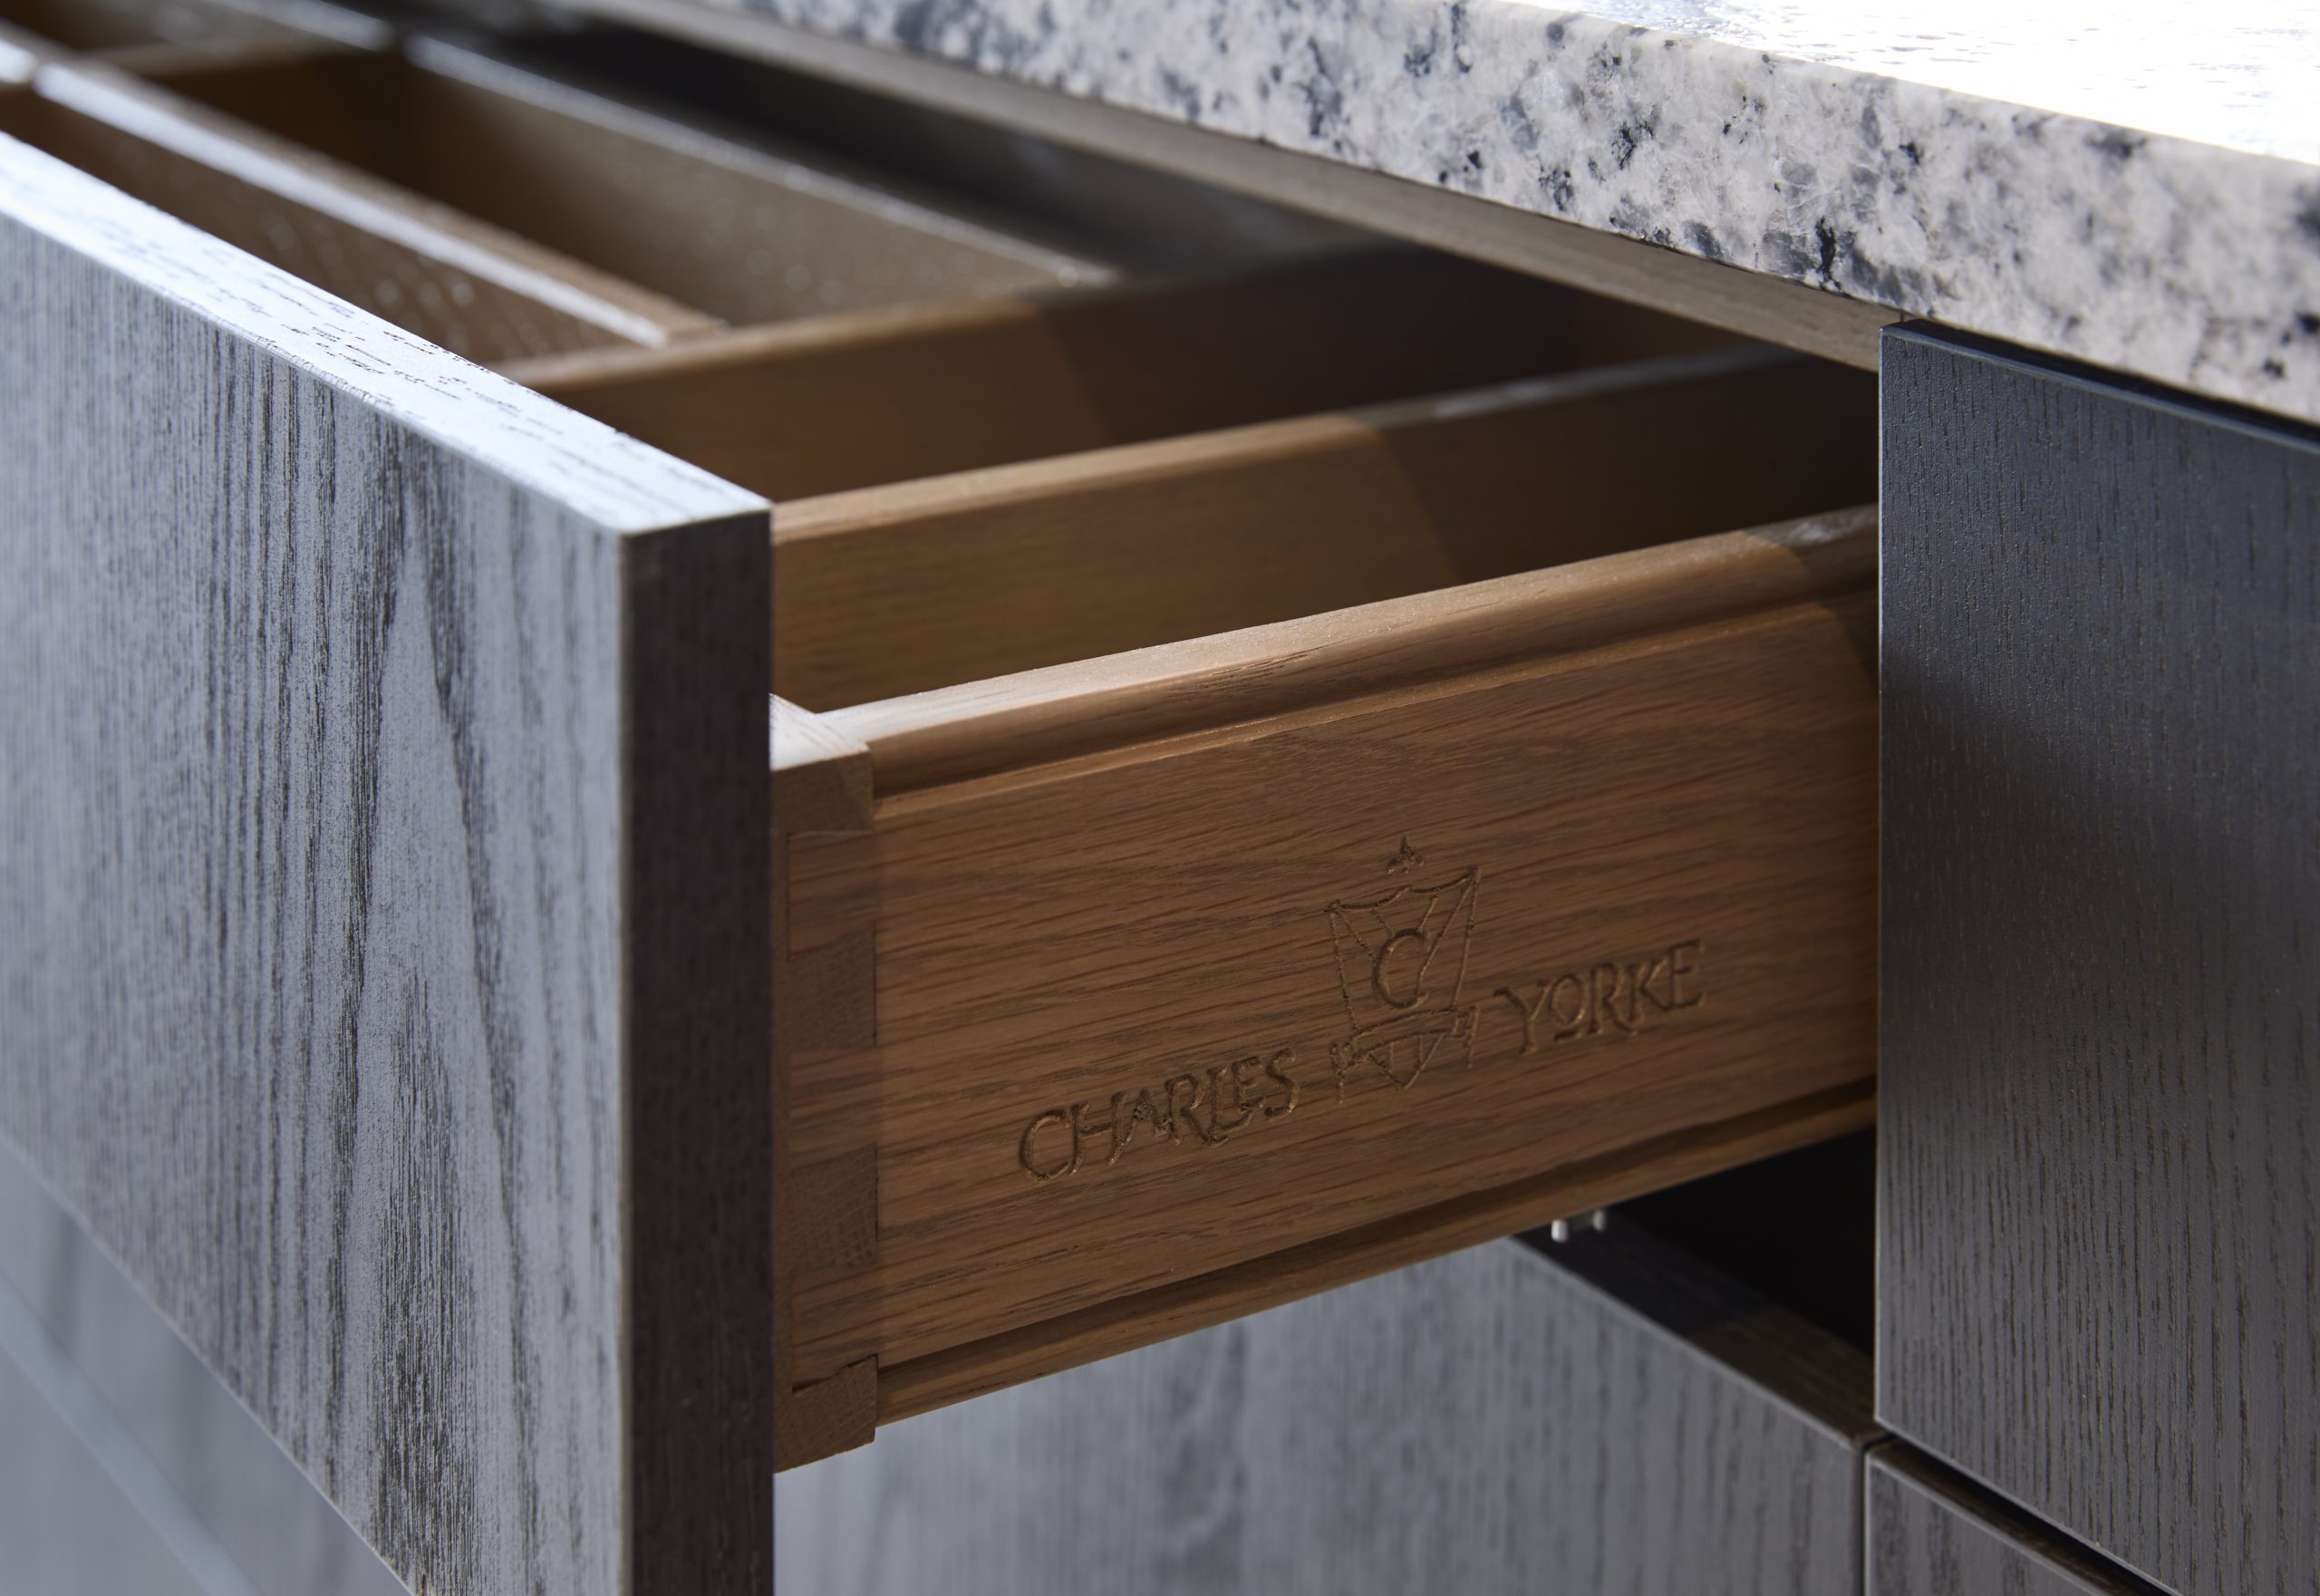 Image of dovetail joints on our kitchen drawers